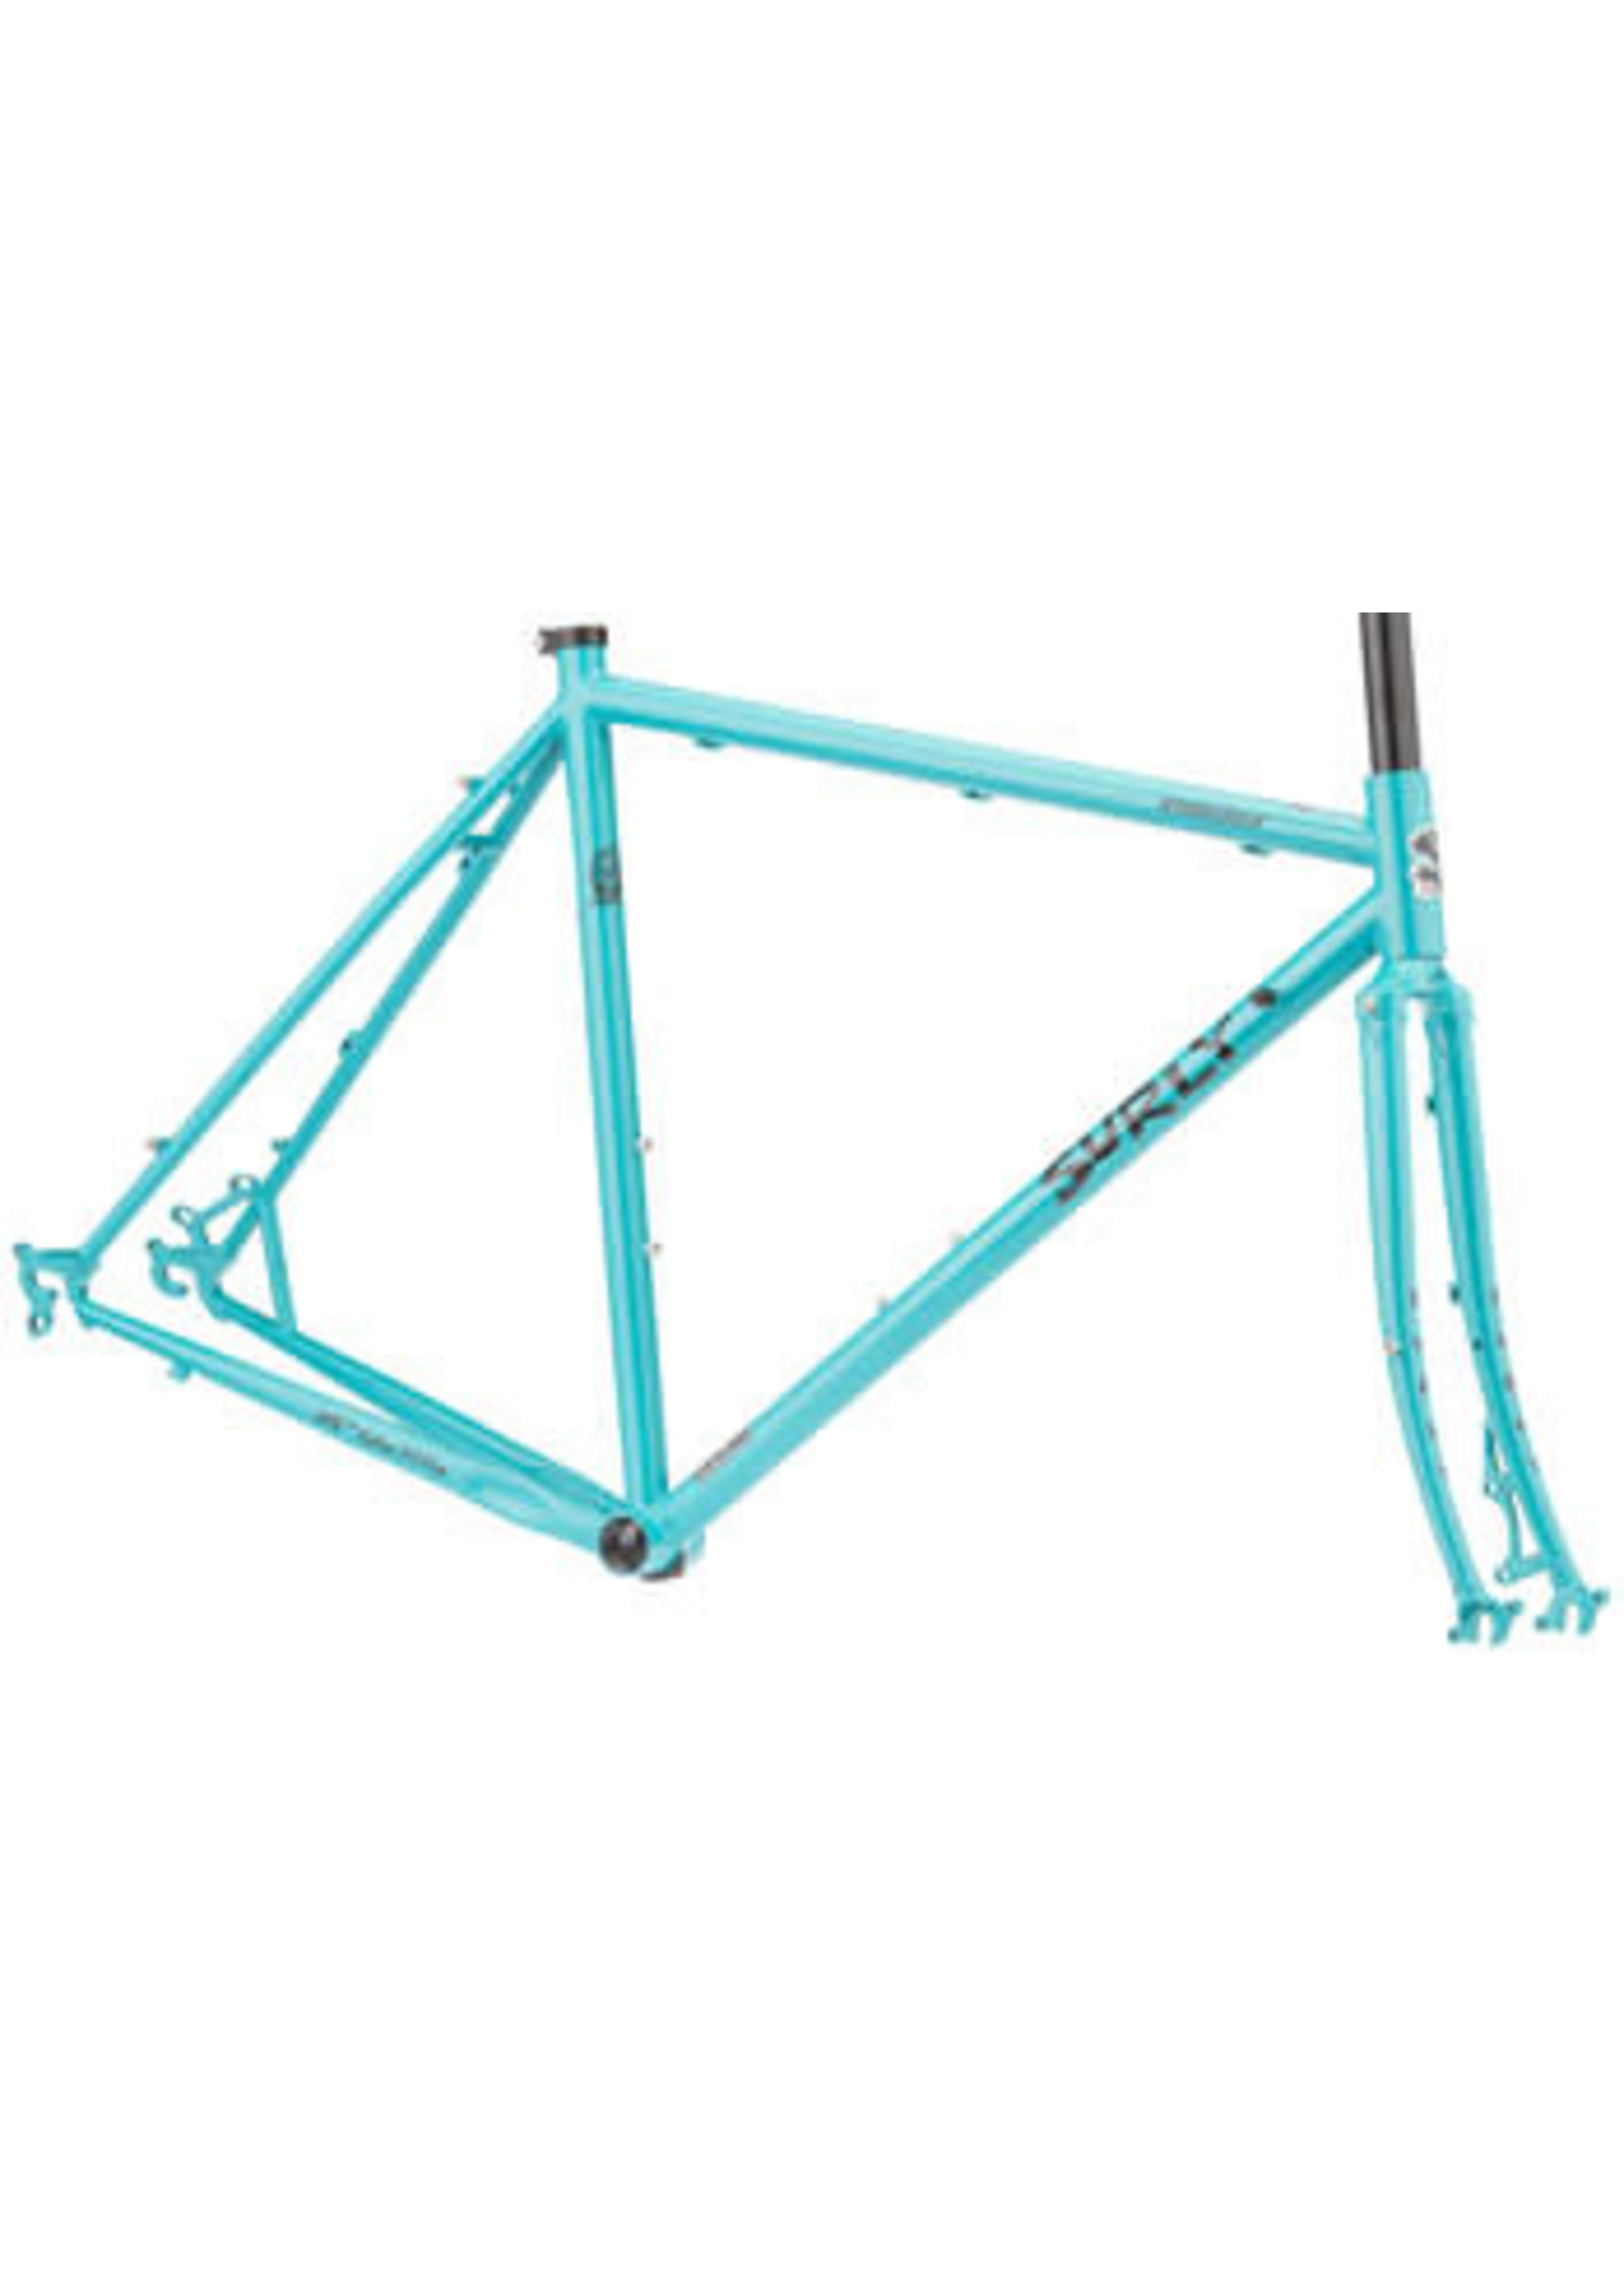 Surly Cadre Surly Straggler 650b 50cm Turquoise "Chlorine Dream"